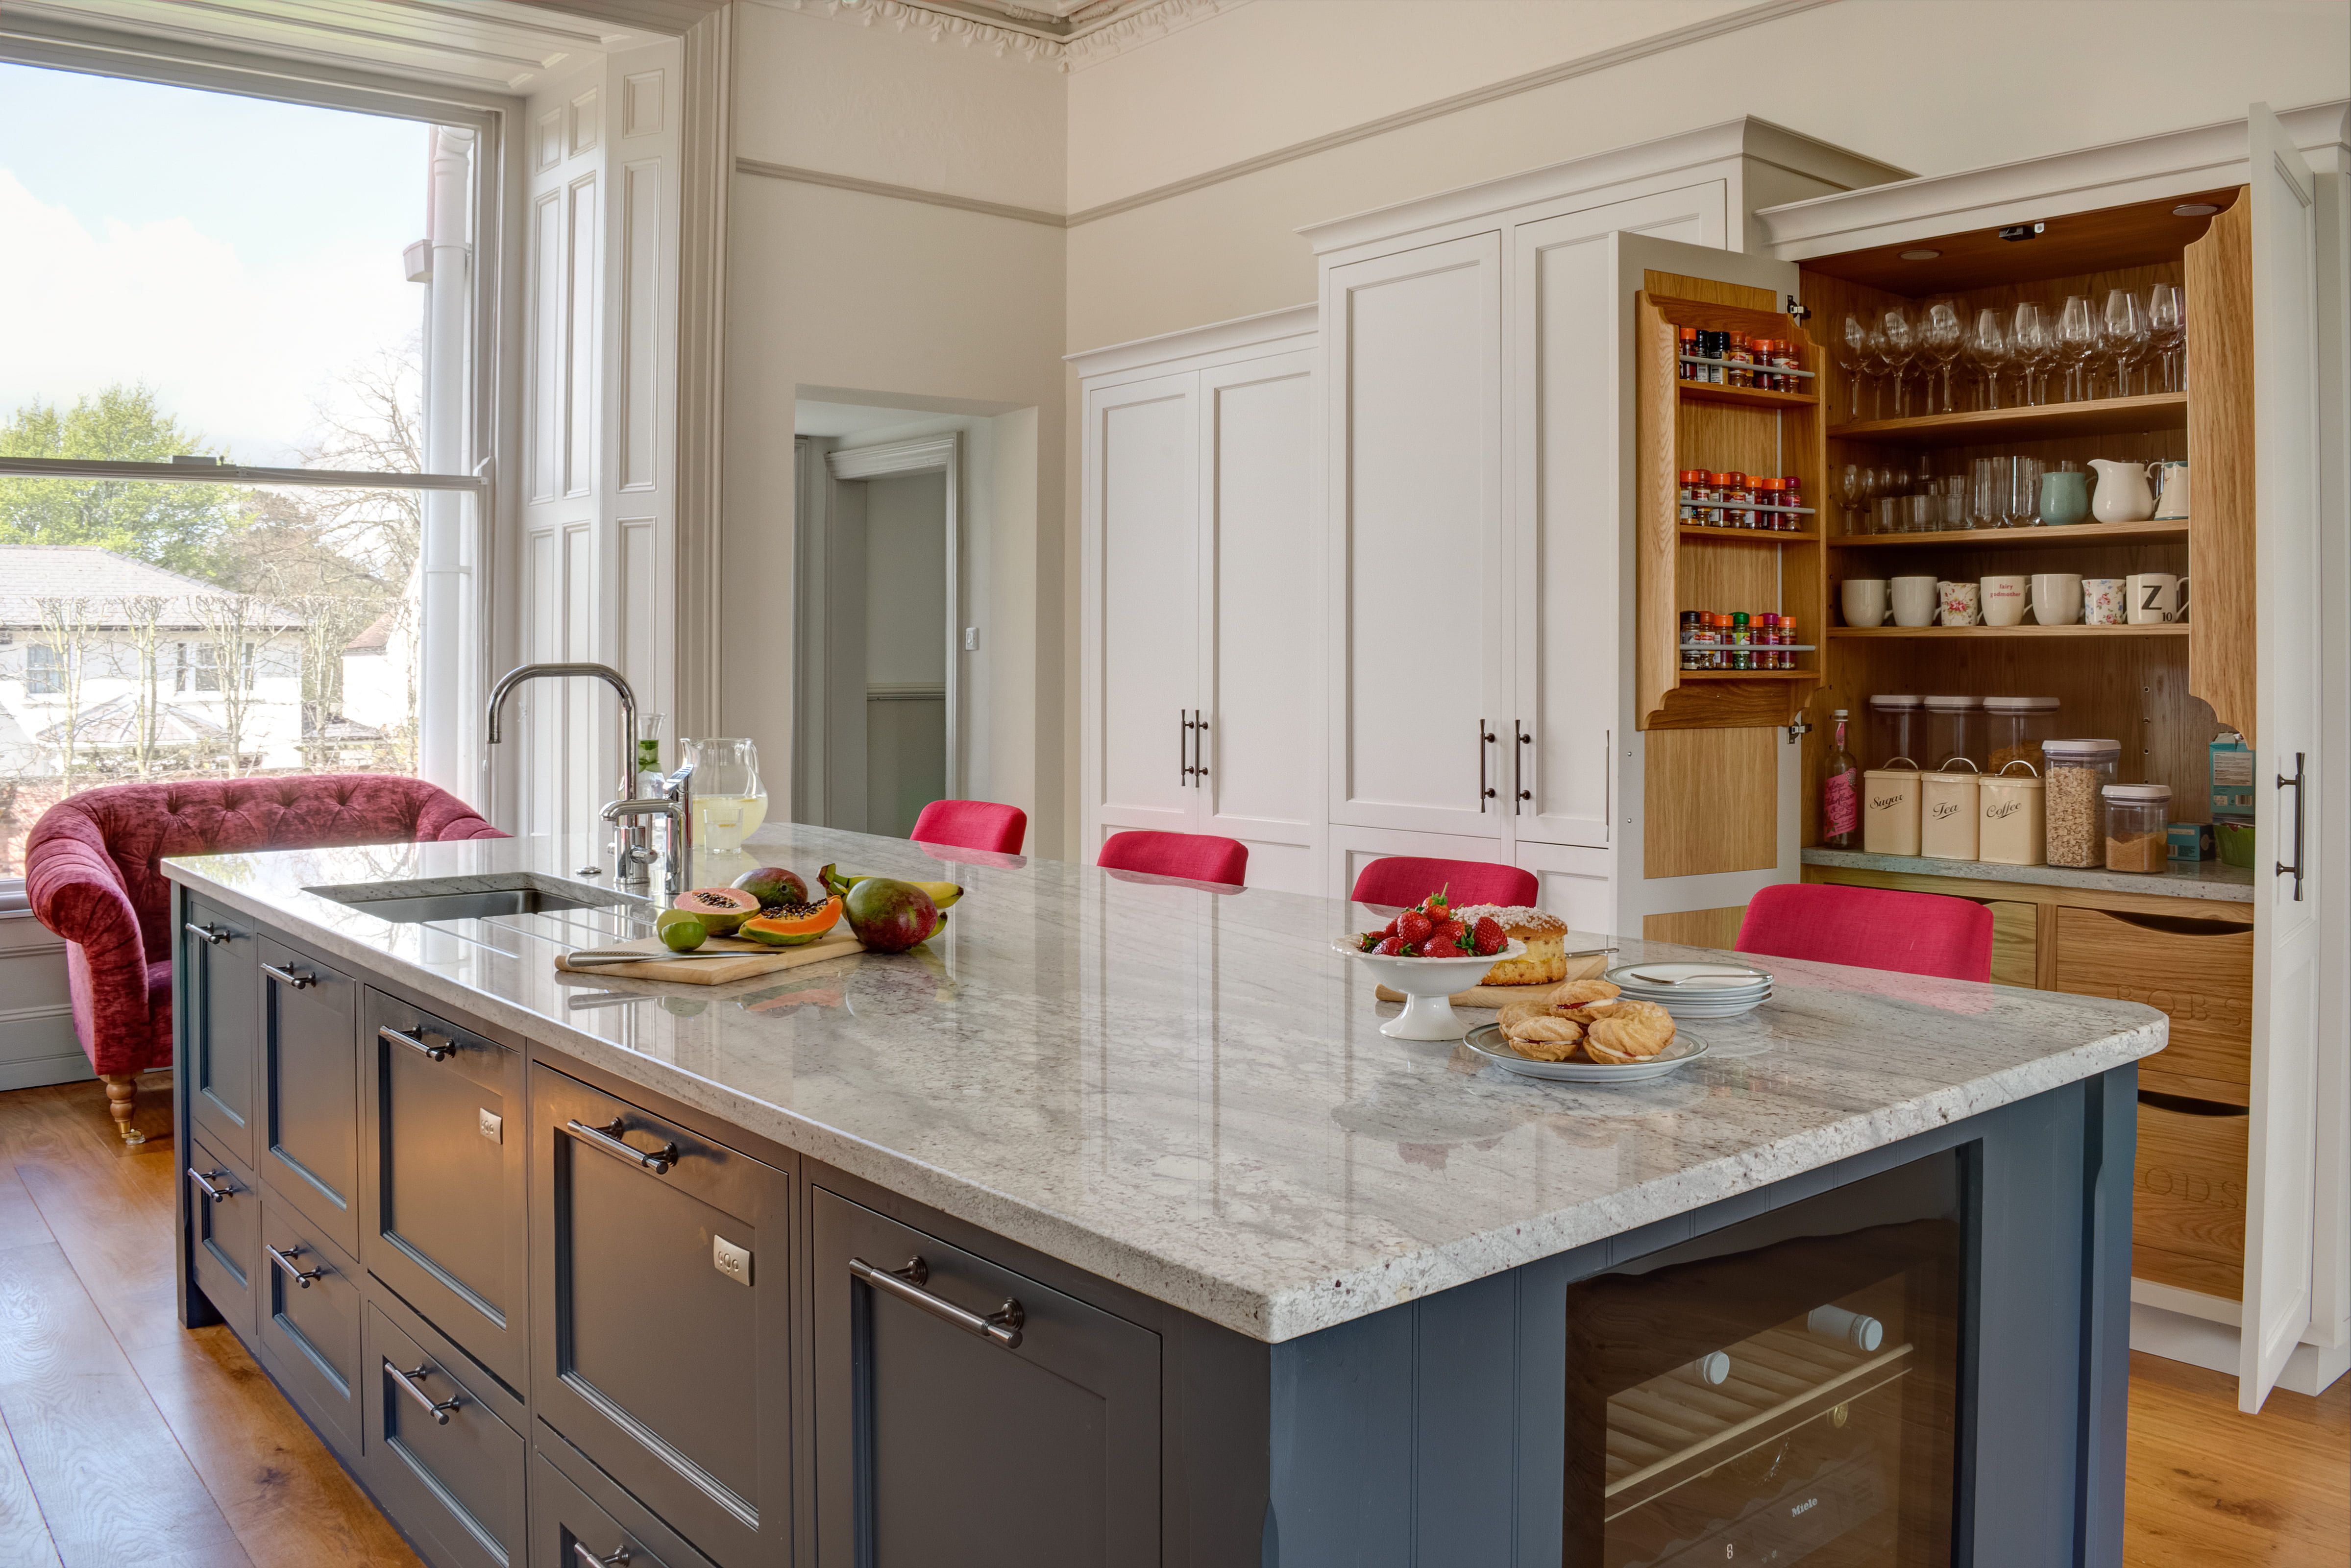 A large, navy blue, bespoke Shaker kitchen island with a grey marble worktop. A large red arm chair and red stools provide some strong contrast and bring more colour to the room. A built-in pantry is shown open in the background. 